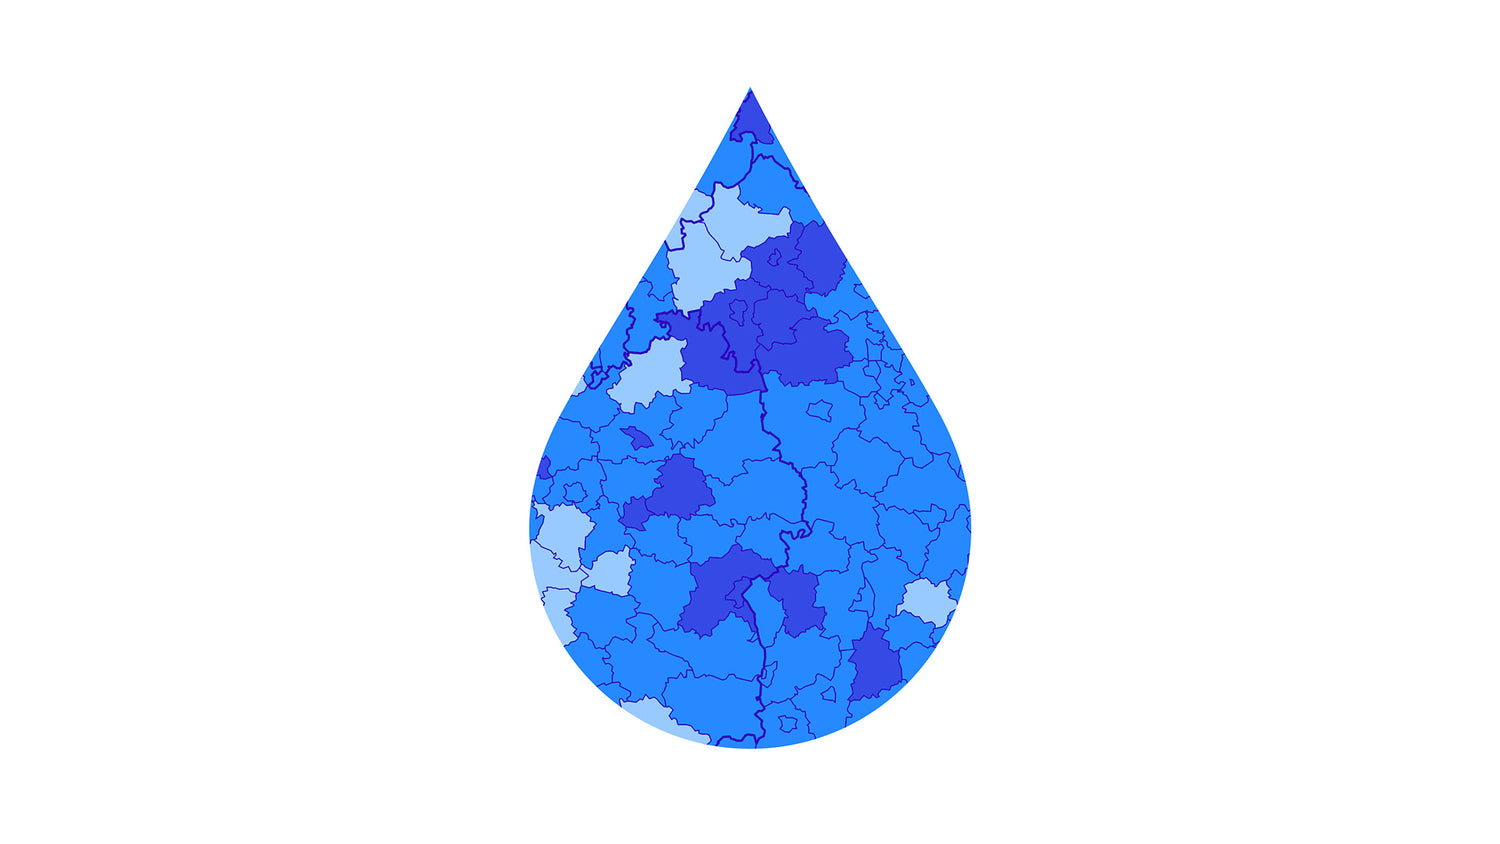 An OH LA LAQUA drop showing a section of the water hardness map of Germany